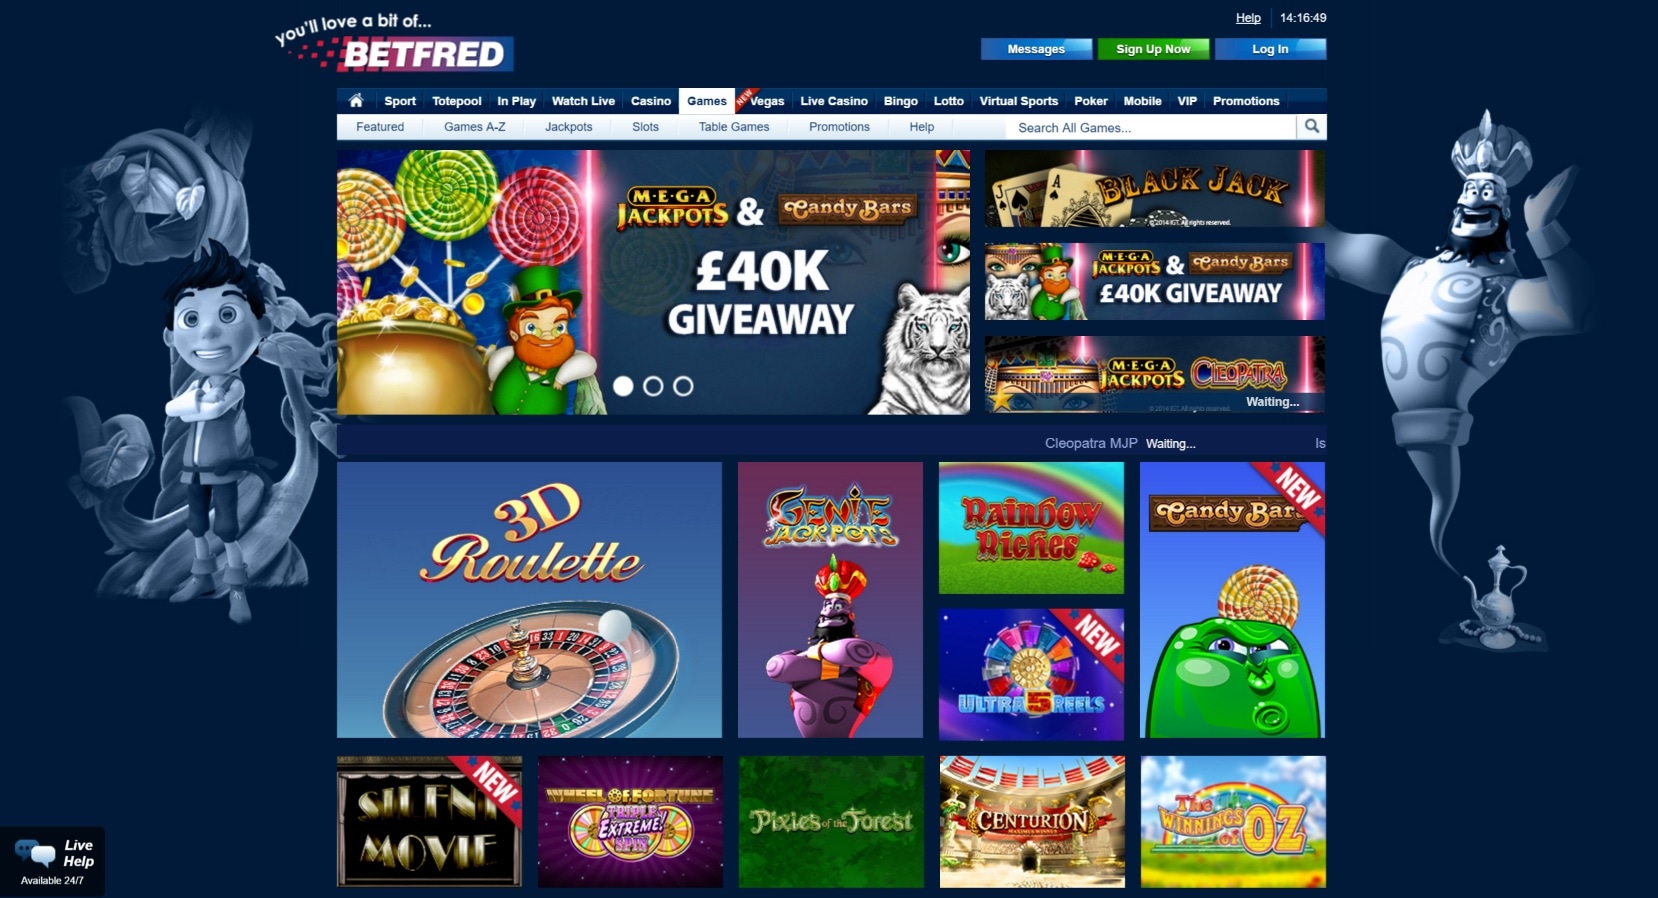 Online Casino Games That Accept Paypal